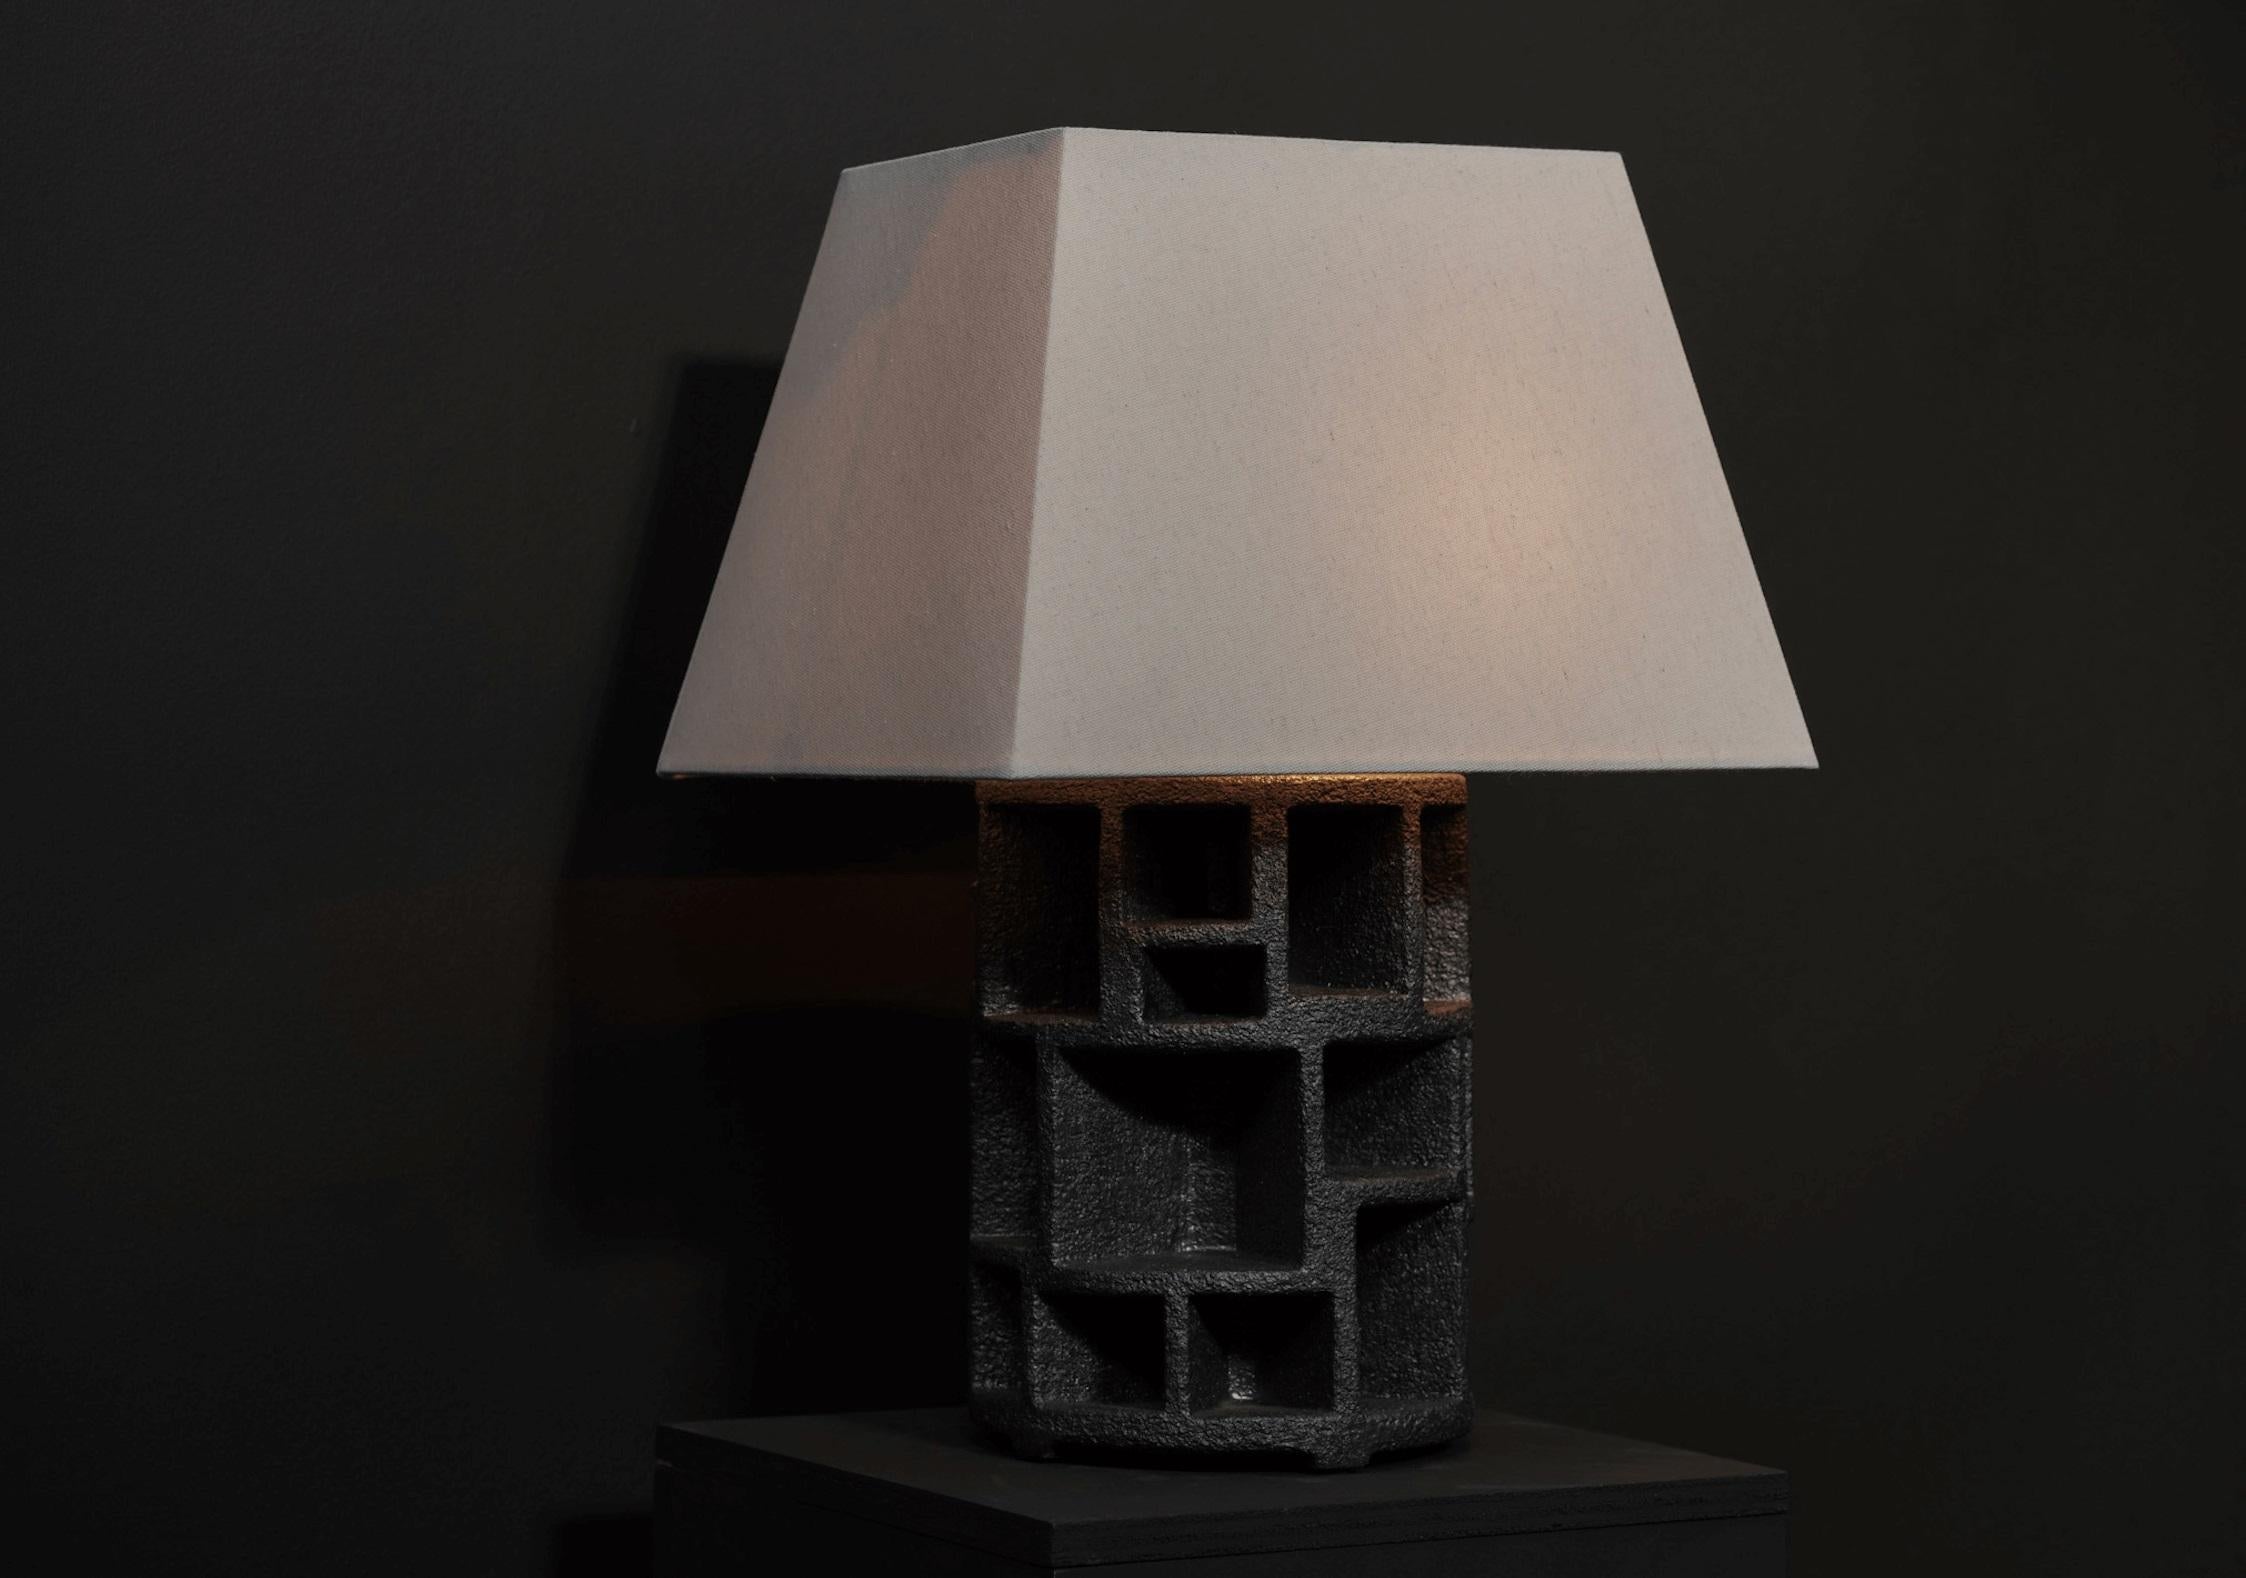 Materials: Ceramic
Origin: California
Dimensions: 7” Diameter Base X OAH 19”, Shade 13” X 10.75” X 9”
Quantity: 1 available
Type: Table Lamp 

At STUDIO BALESTRA, we take pride in offering uniquely handmade ceramic lighting, meticulously crafted by